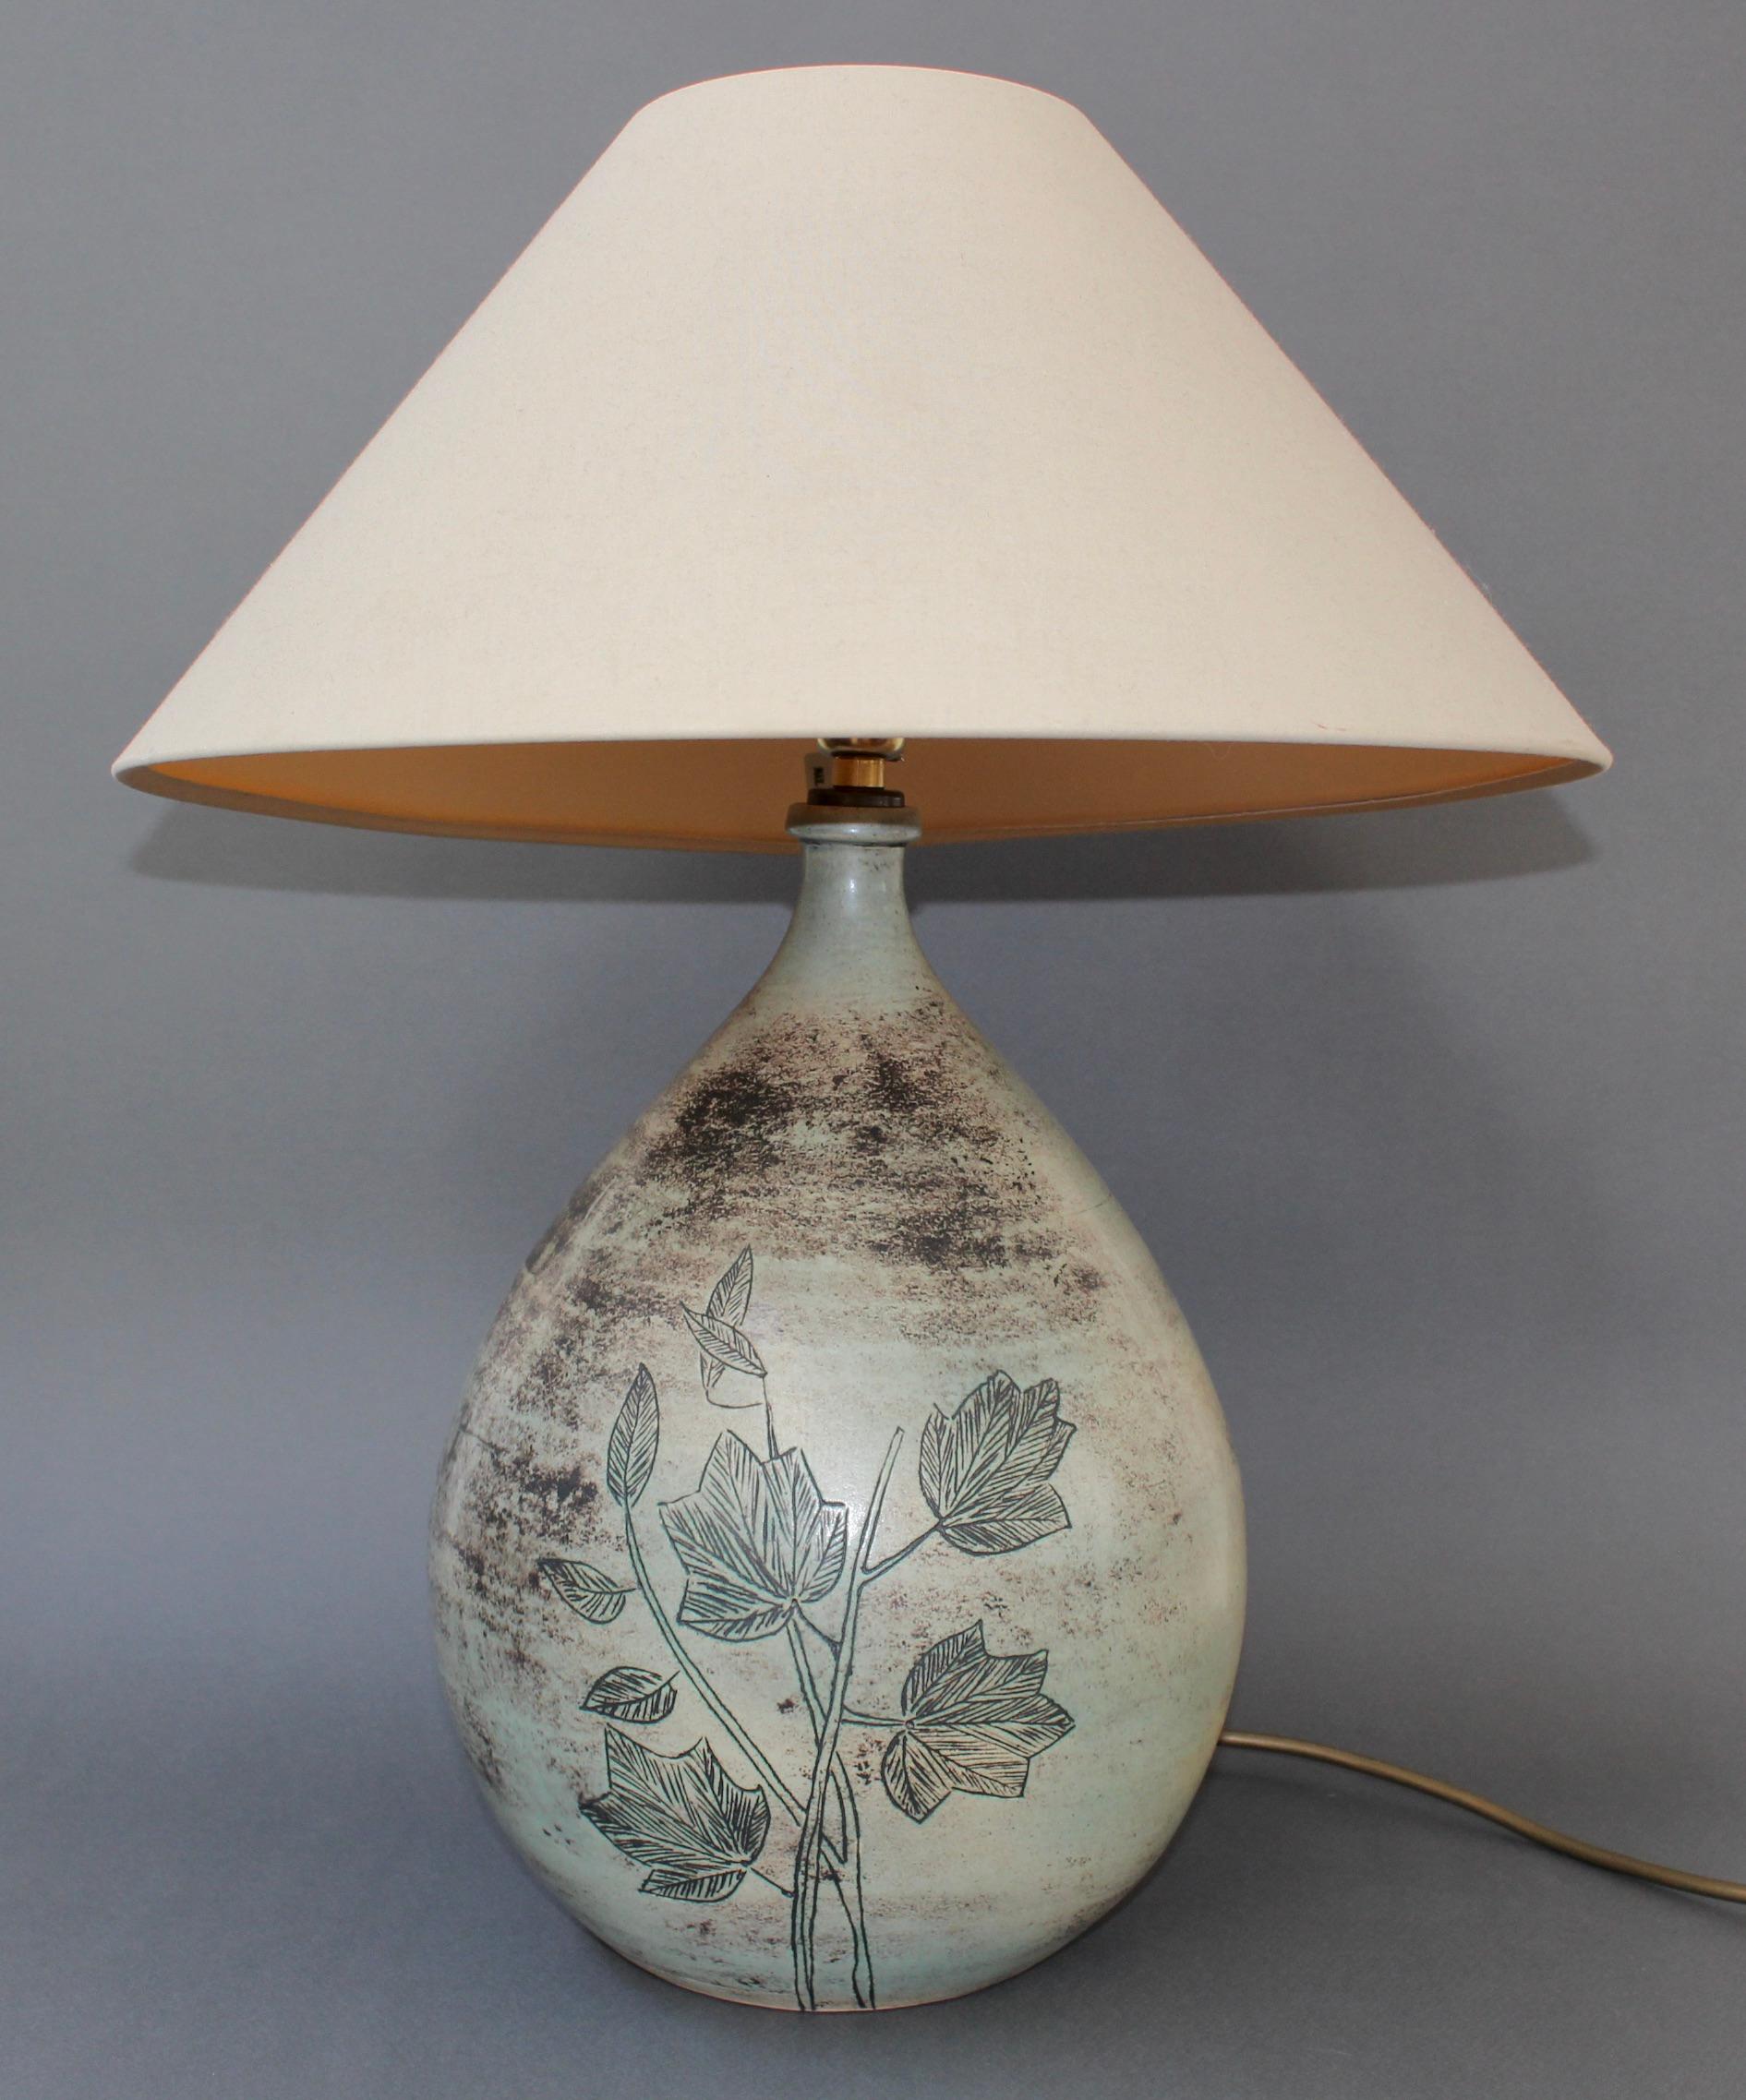 Large vintage ceramic table lamp, (circa 1950s) by French ceramicist, Jacques Blin. This stunningly beautiful French lamp incorporates Blin's characteristic sgraffito-etchings on its surface. Here there are a series of leaves on their stems. The